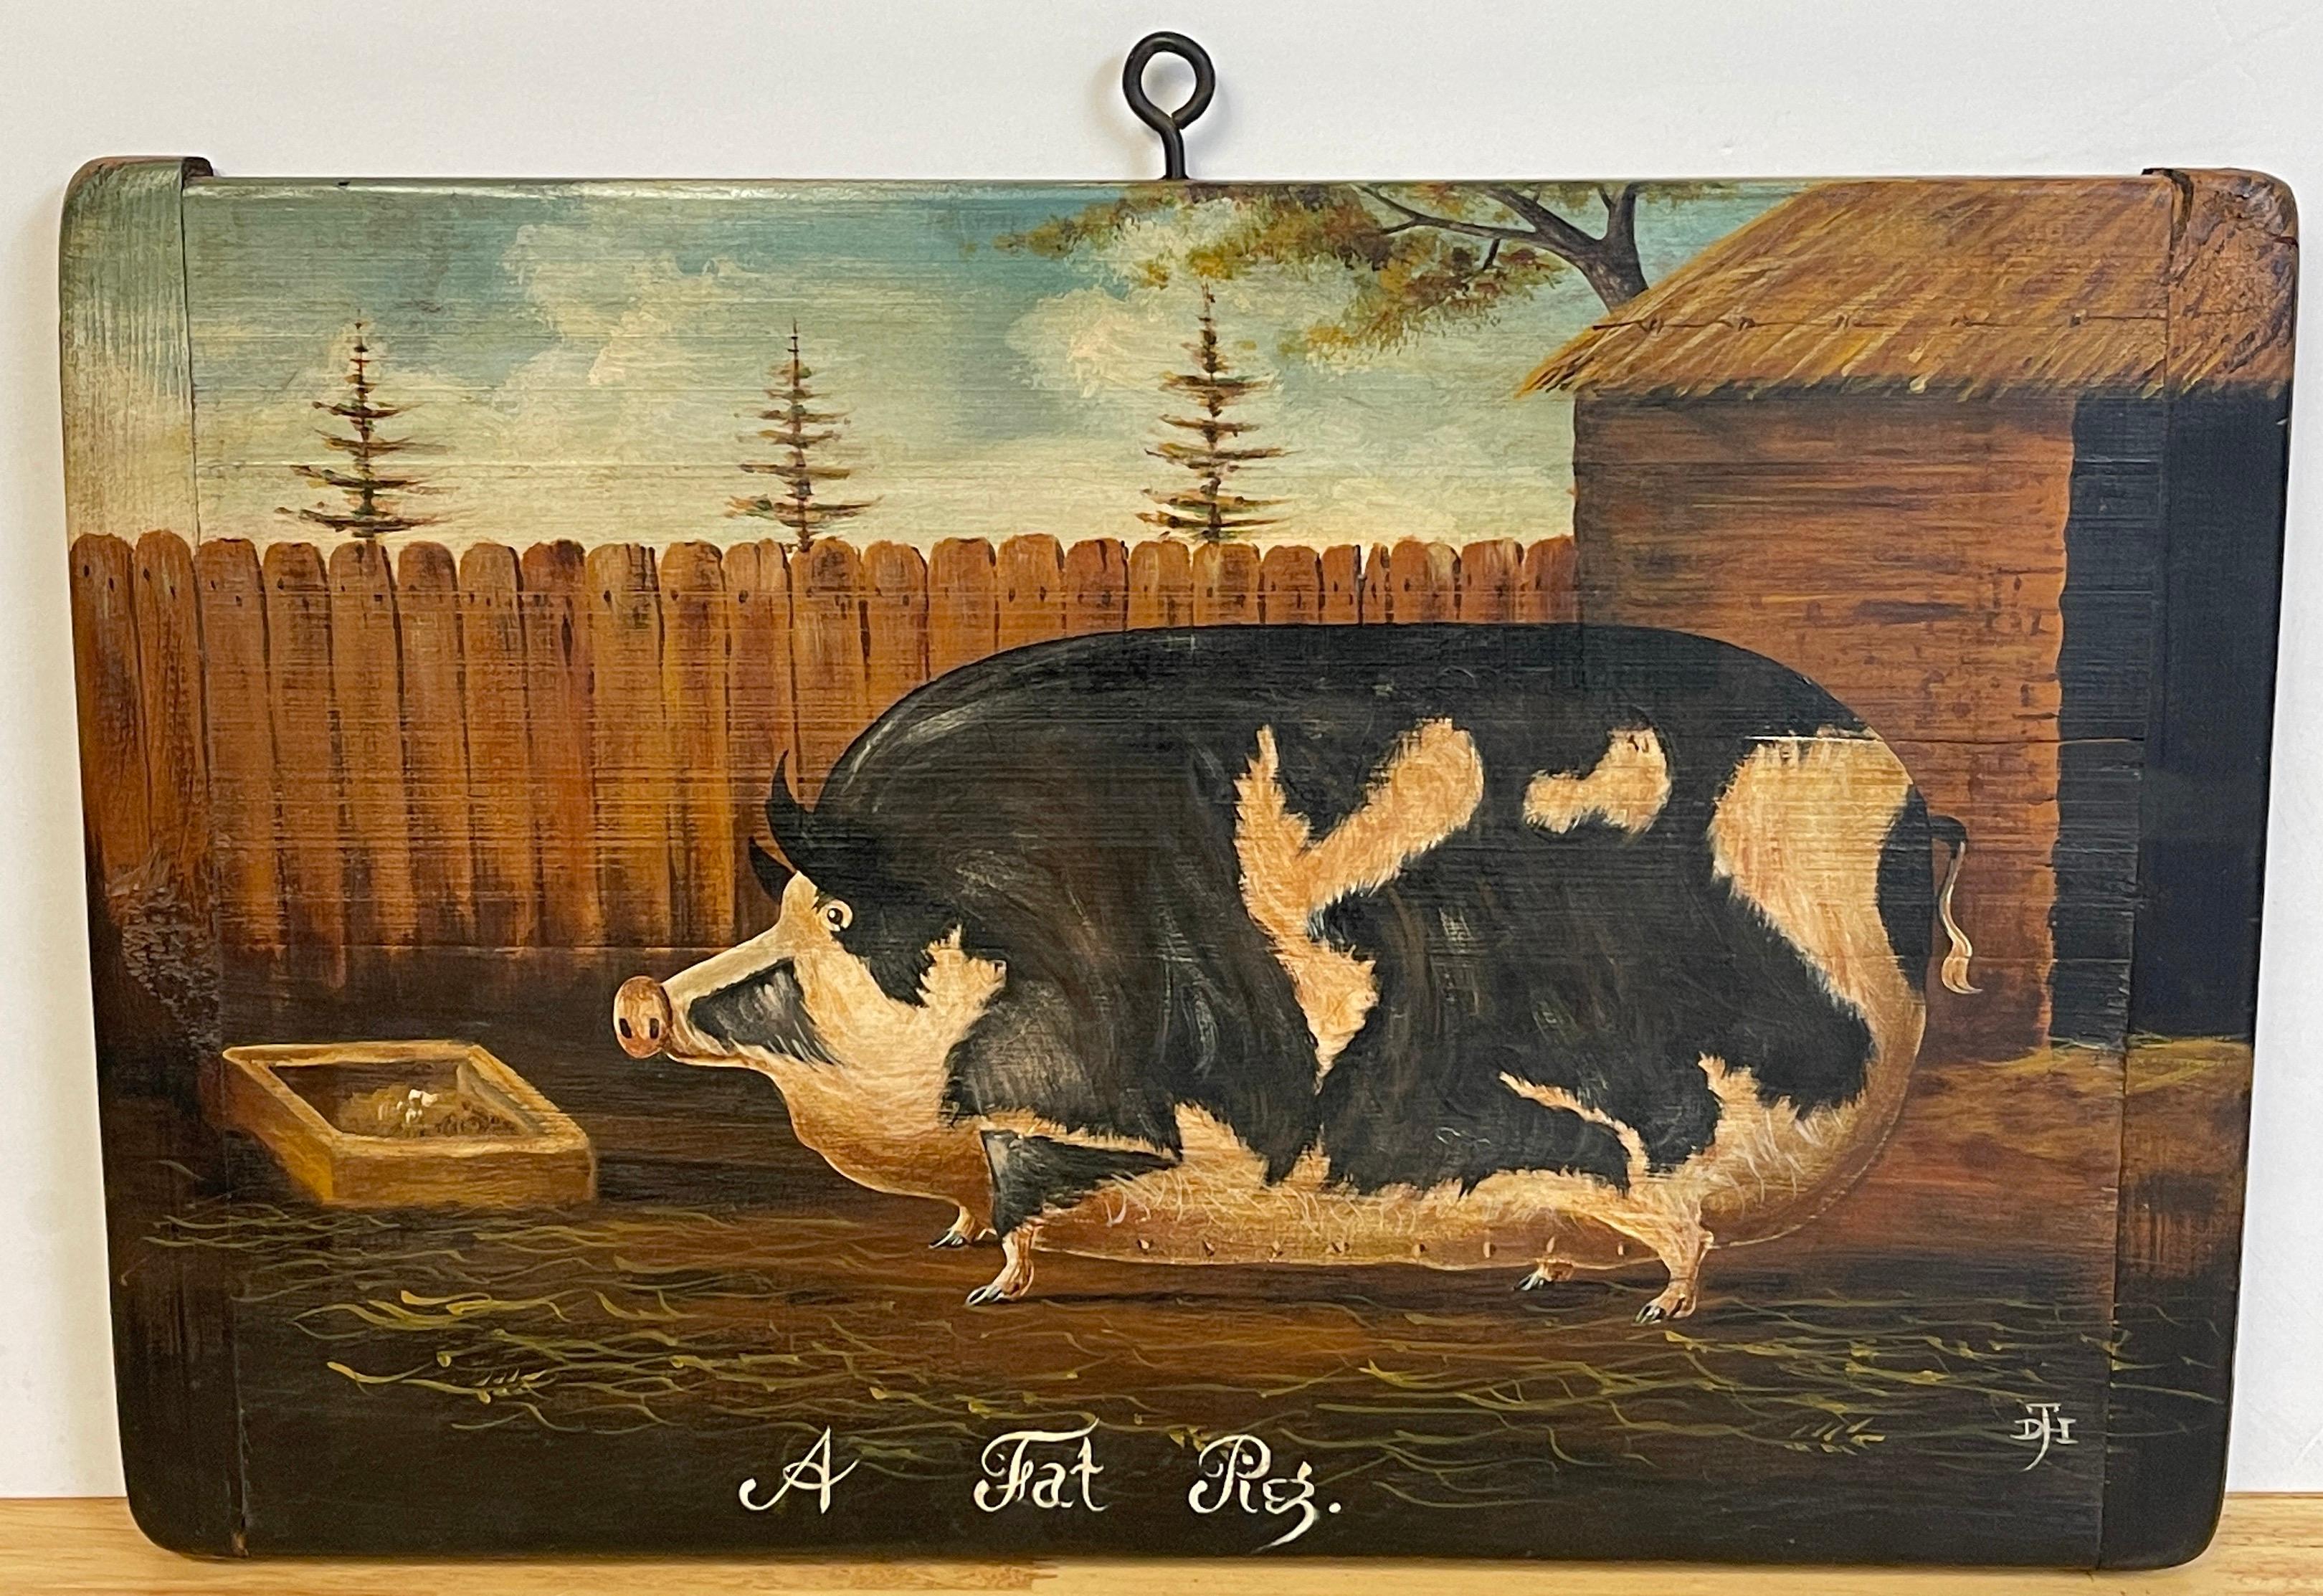 English school style painting of a prize pig, 'A Fat Pig'
A fine 20th century oil painting in the 19th century style. Well painted of a prize pig, in farm landscape. 
Oil on board 18